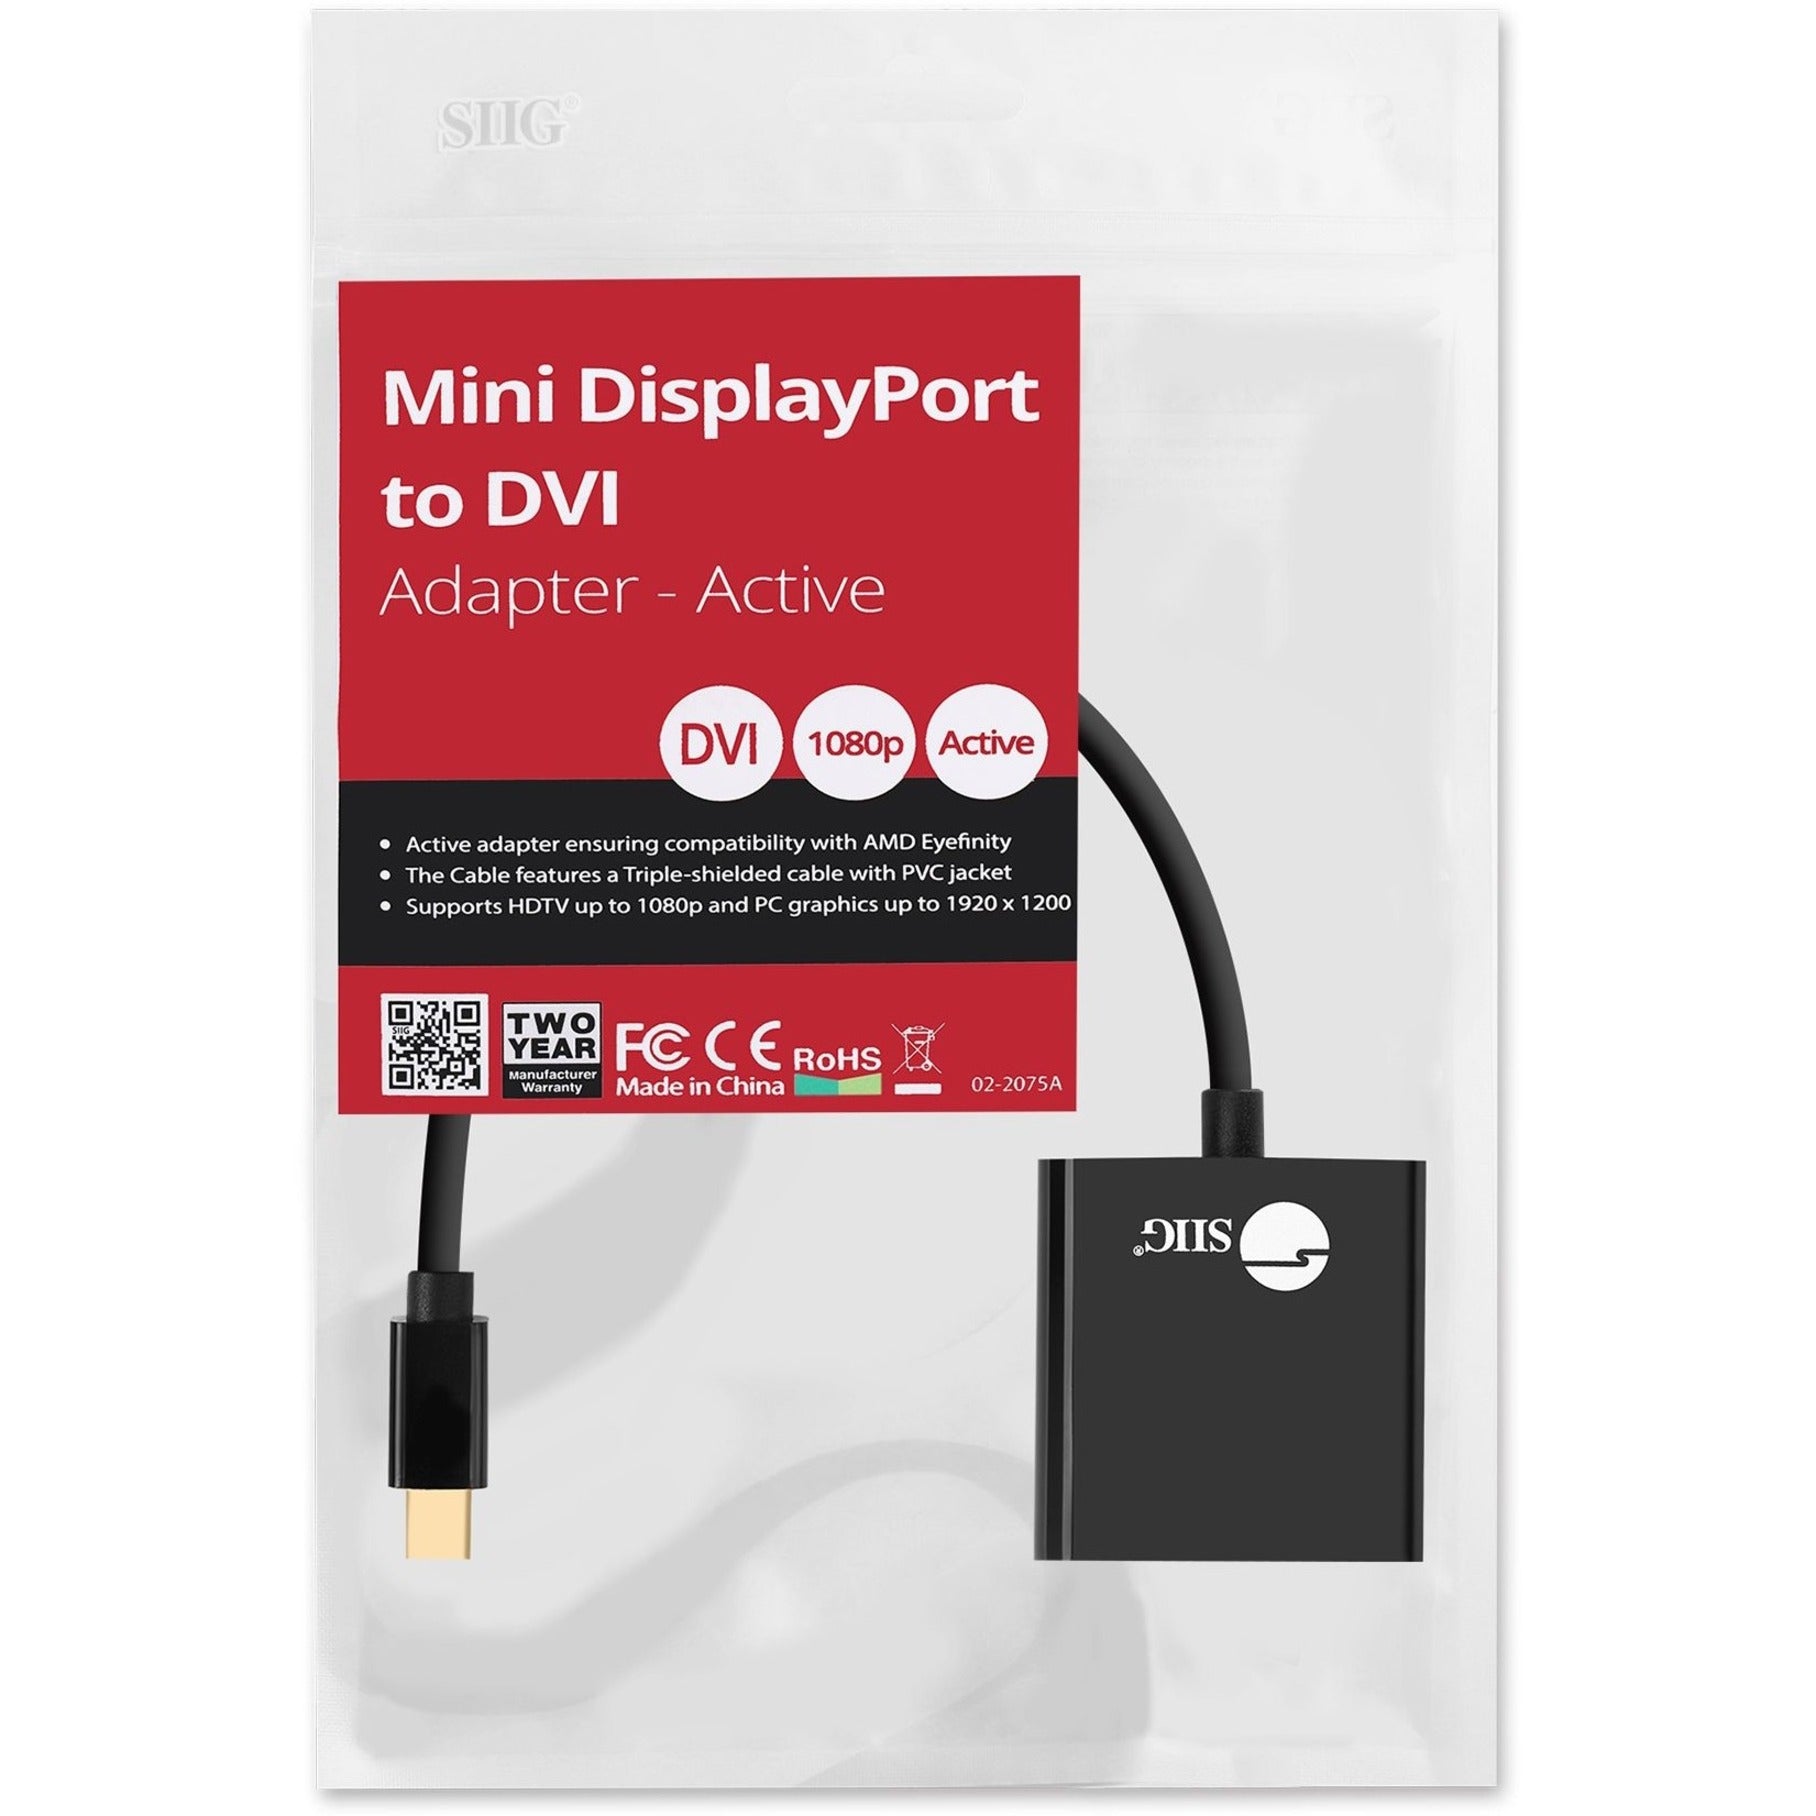 SIIG CB-DP1X12-S1 Mini DisplayPort to DVI Adapter - Active, Triple Shielded, Plug & Play, Supports 3840 x 2160 Resolution